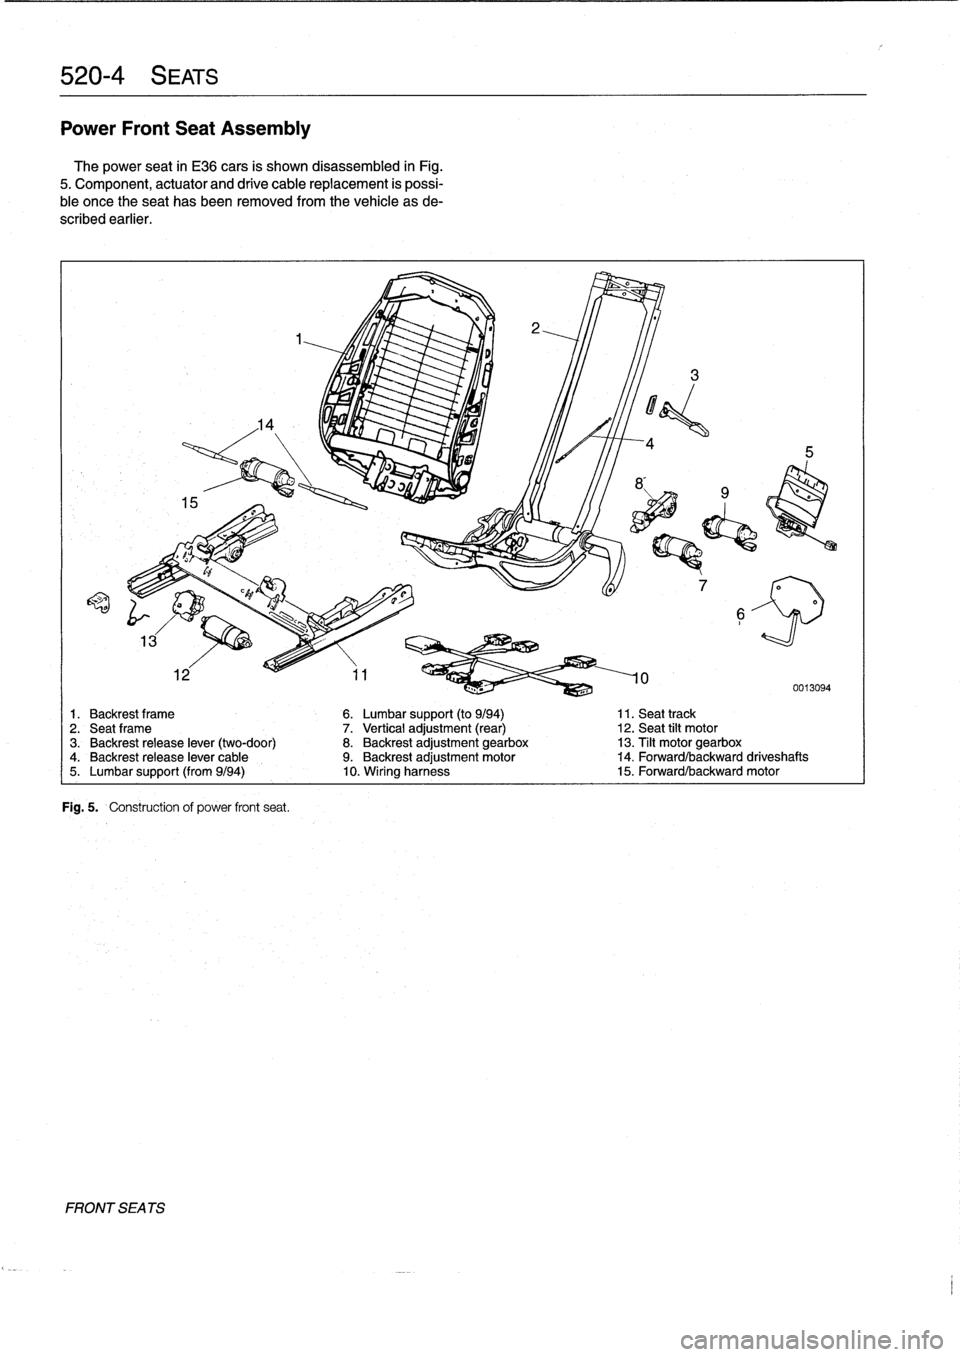 BMW 318i 1995 E36 Workshop Manual 
520-
4
SEATS

Power
Front
Seat
Assembly
The
power
seat
in
E36
cars
is
shown
disassembled
in
Fig
.

5
.
Component,
actuator
and
drive
cable
replacement
is
possi-
ble
once
theseat
has
been
removed
from